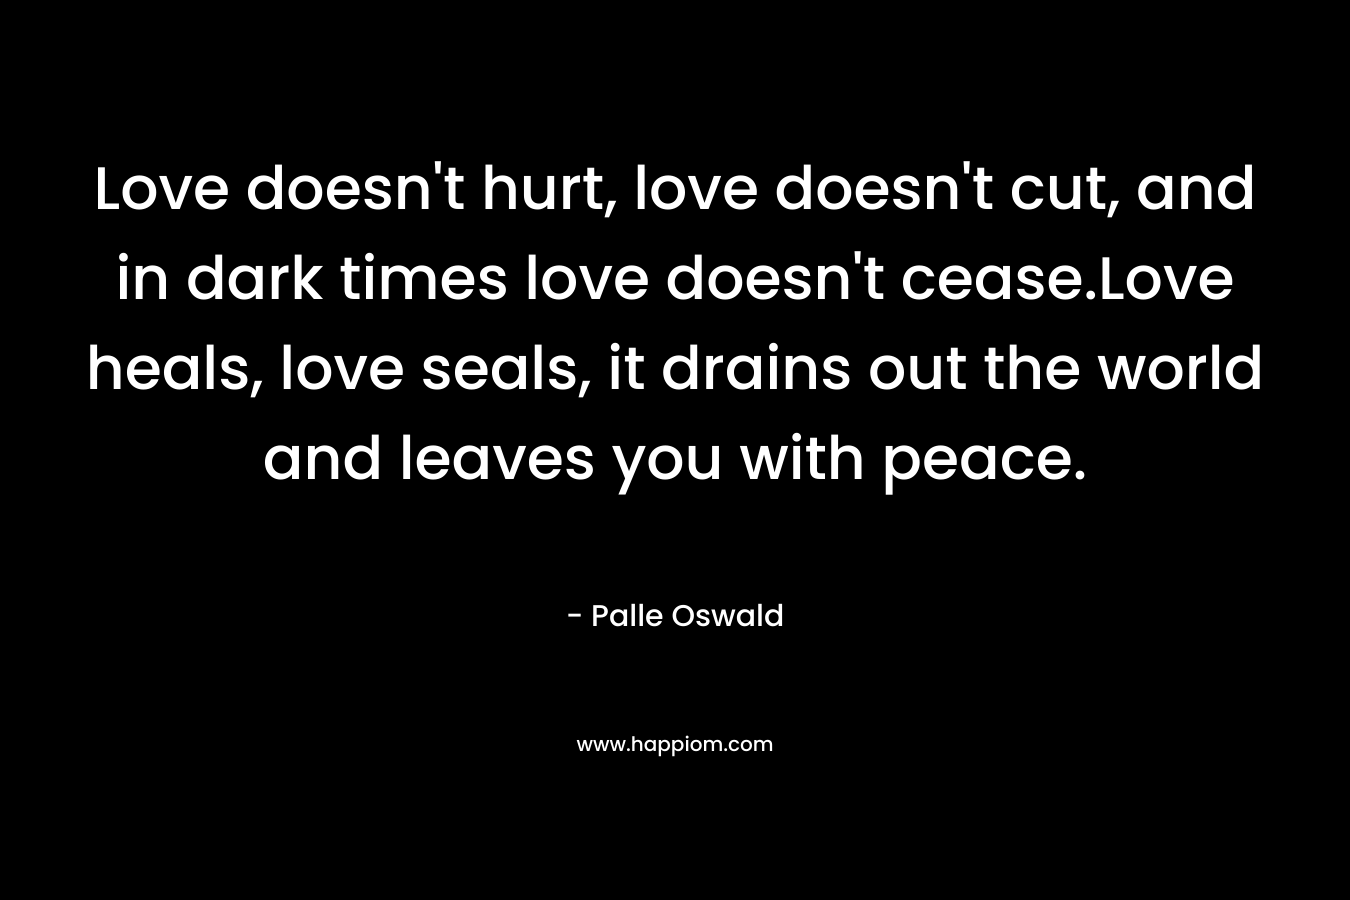 Love doesn't hurt, love doesn't cut, and in dark times love doesn't cease.Love heals, love seals, it drains out the world and leaves you with peace.